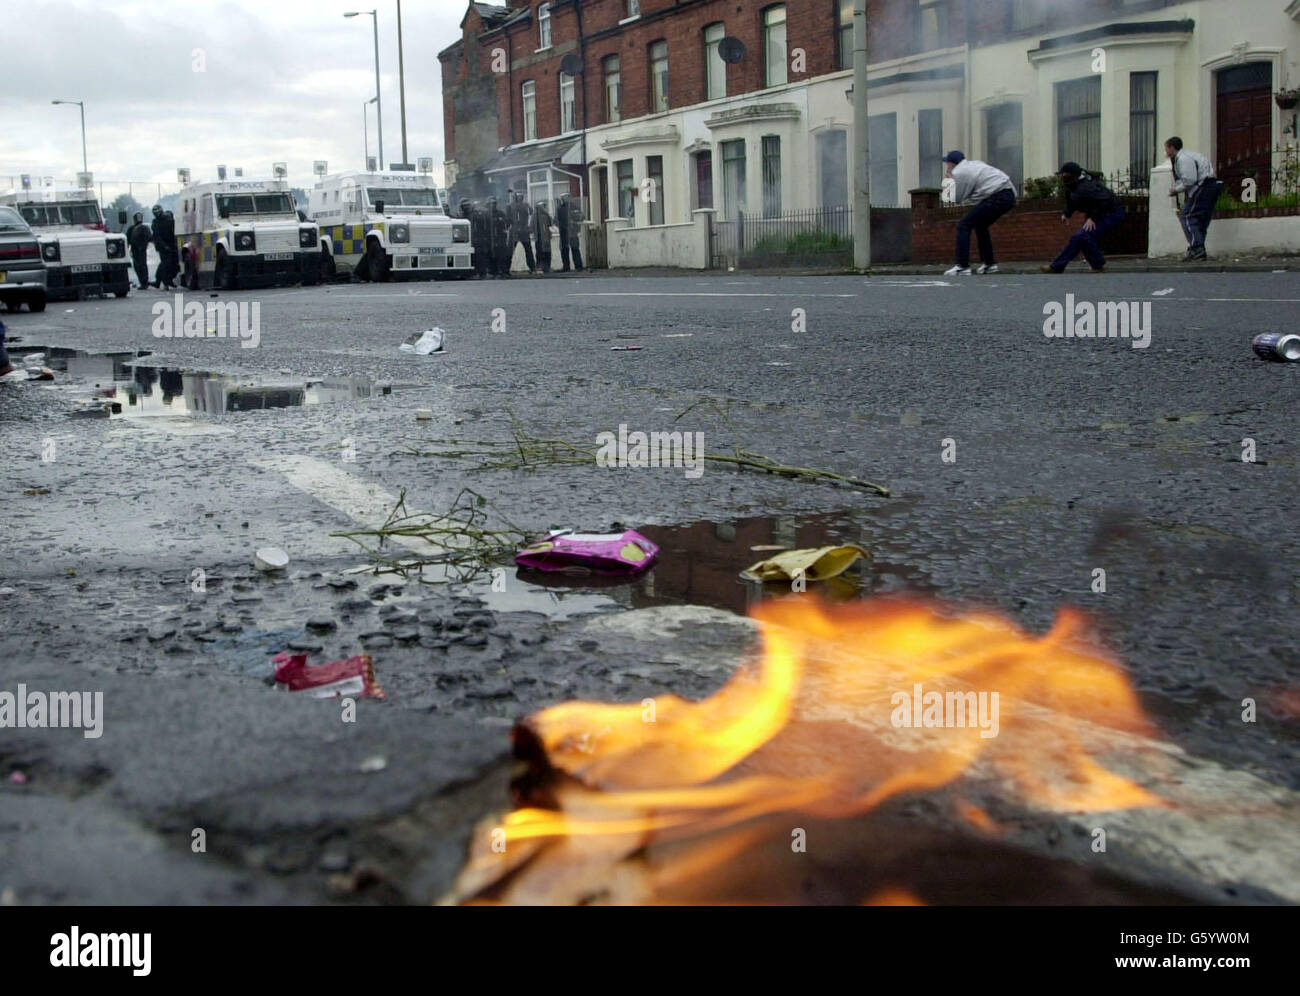 Police hold a line as Catholic youths throw stones at the bottom of the Springfield Road, west Belfast. Police suffered a barrage of petrol bombs, fireworks, and bricks after officers fired a plastic baton rounds at protesters attacking an Orange Order parade in a Nationalist area. * The trouble began when Catholic protesters saw Orangemen walking up a contested part of the Springfield Road. Stock Photo